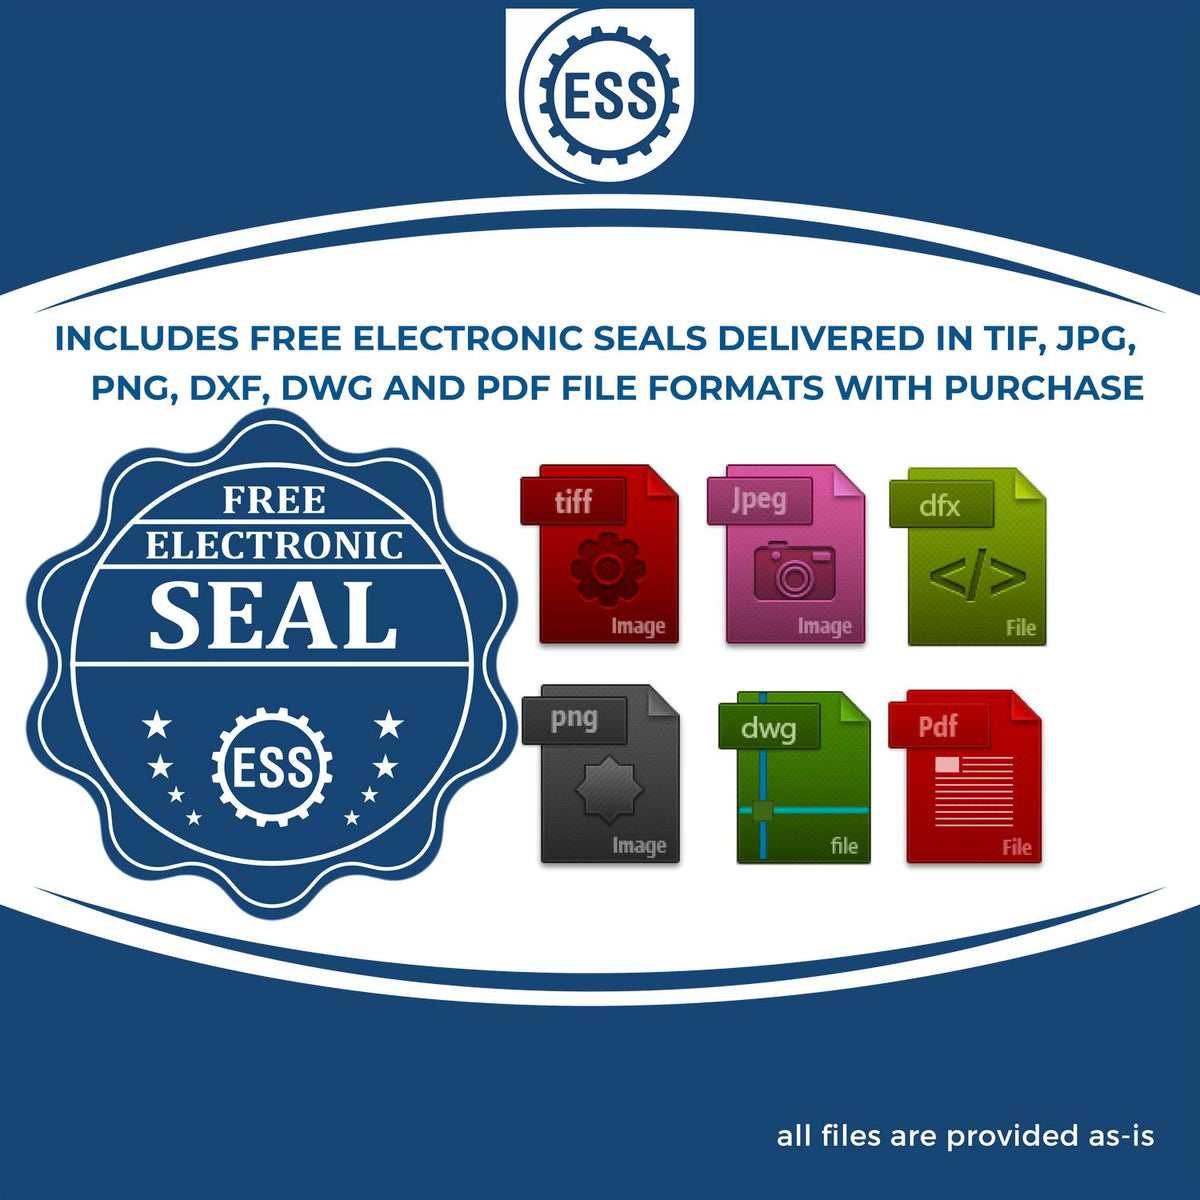 An infographic for the free electronic seal for the Hybrid New Jersey Land Surveyor Seal illustrating the different file type icons such as DXF, DWG, TIF, JPG and PNG.